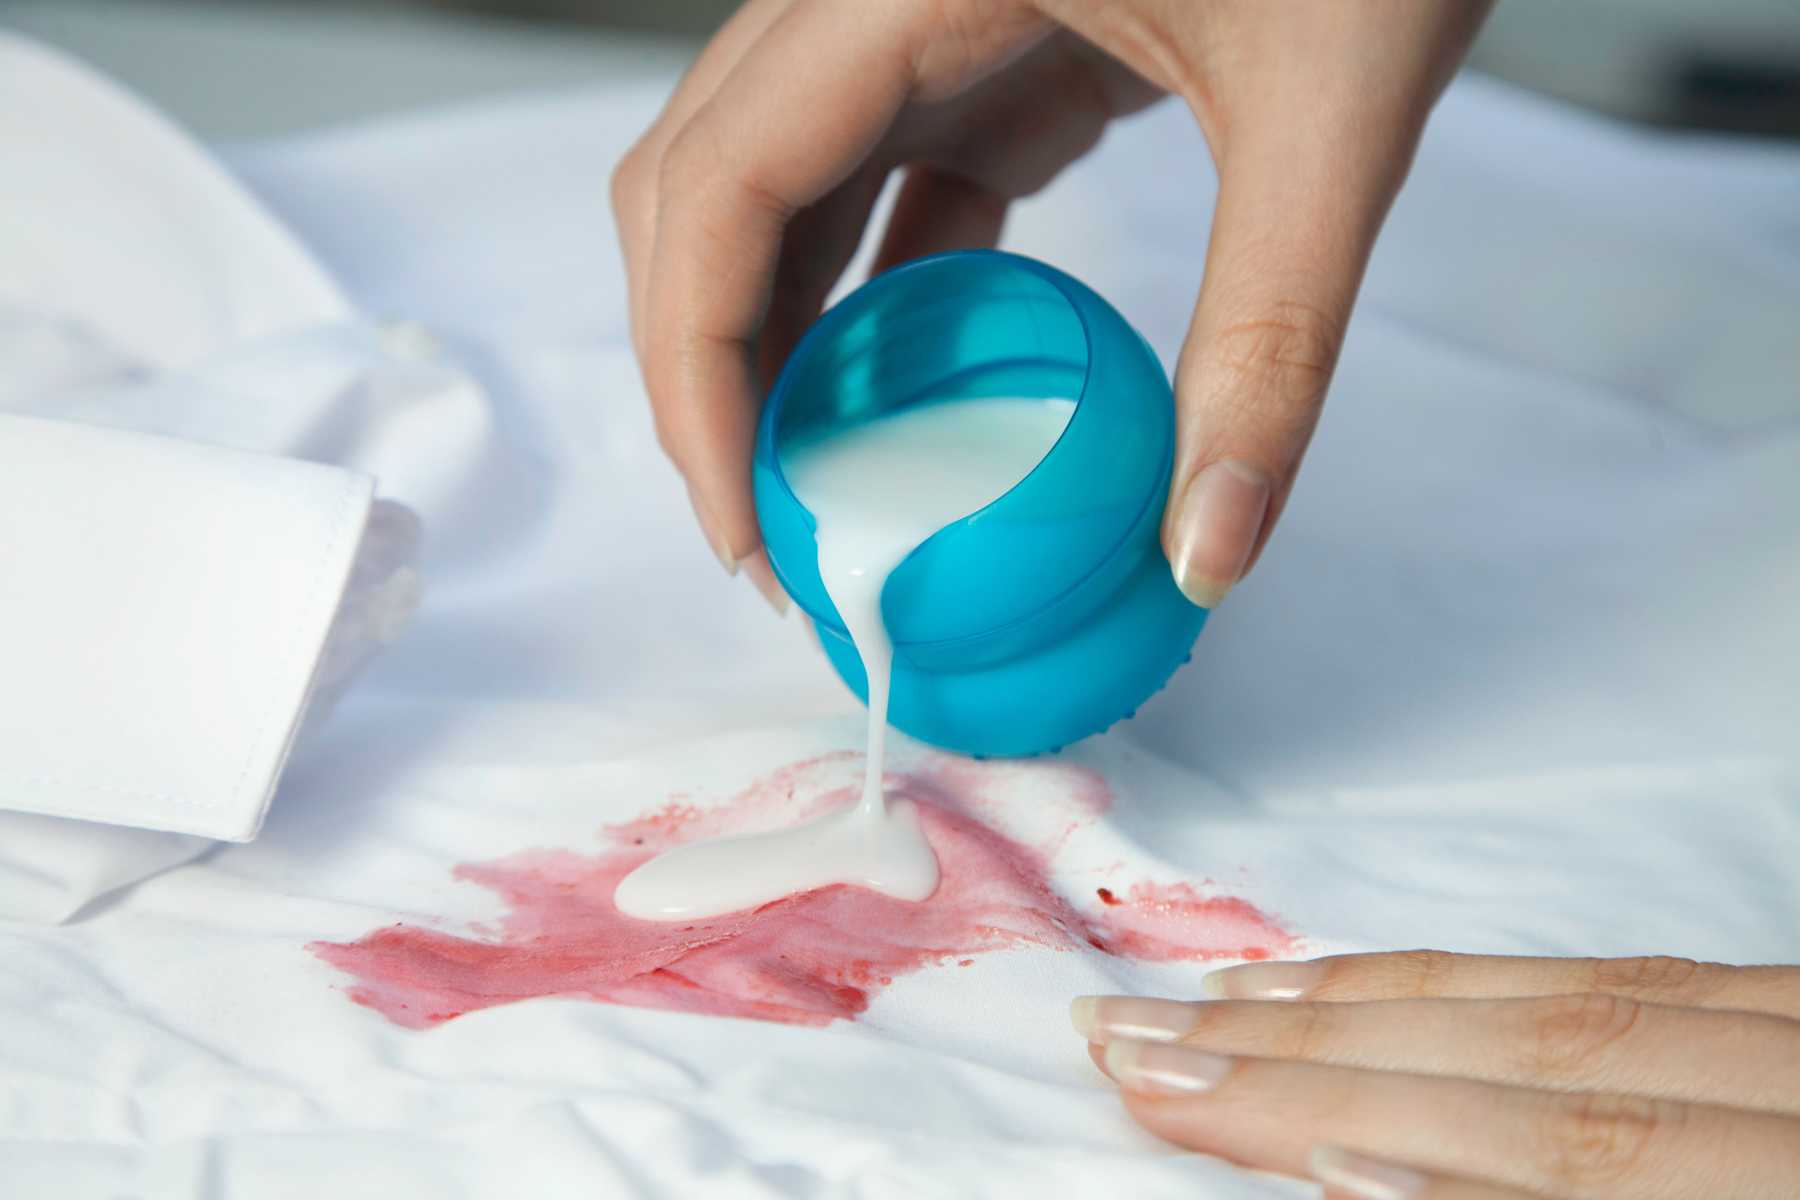 How to remove paint from clothes without ruining them